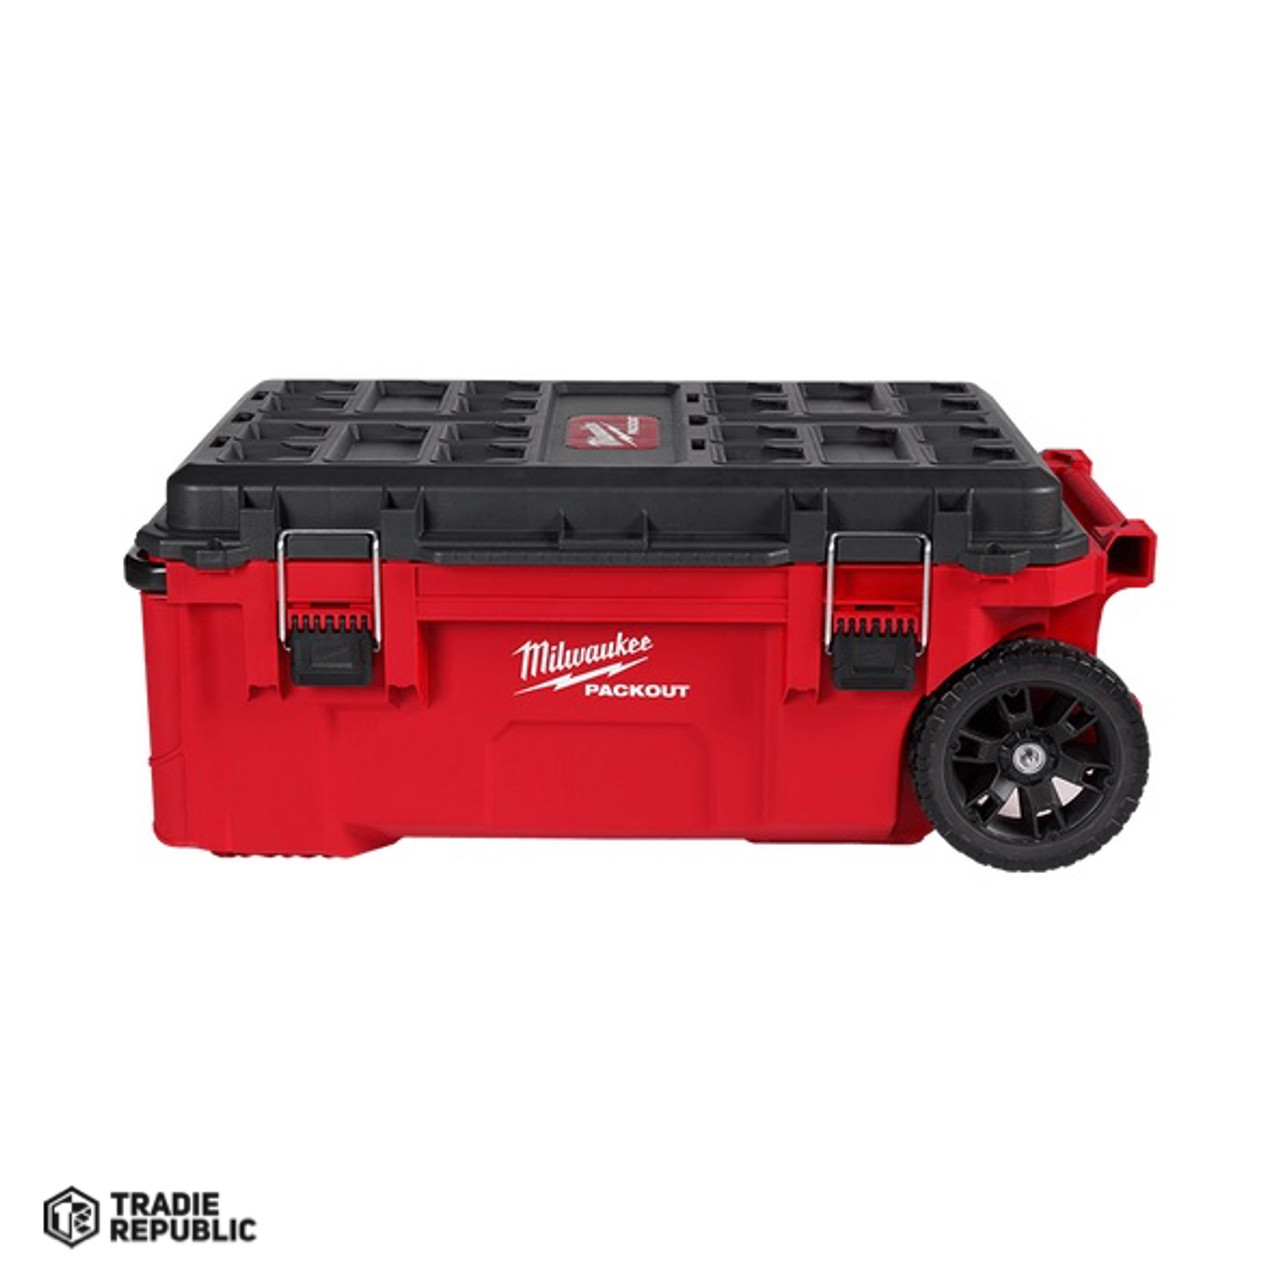 48228428 Milwaukee Packout Rolling Tool Chest